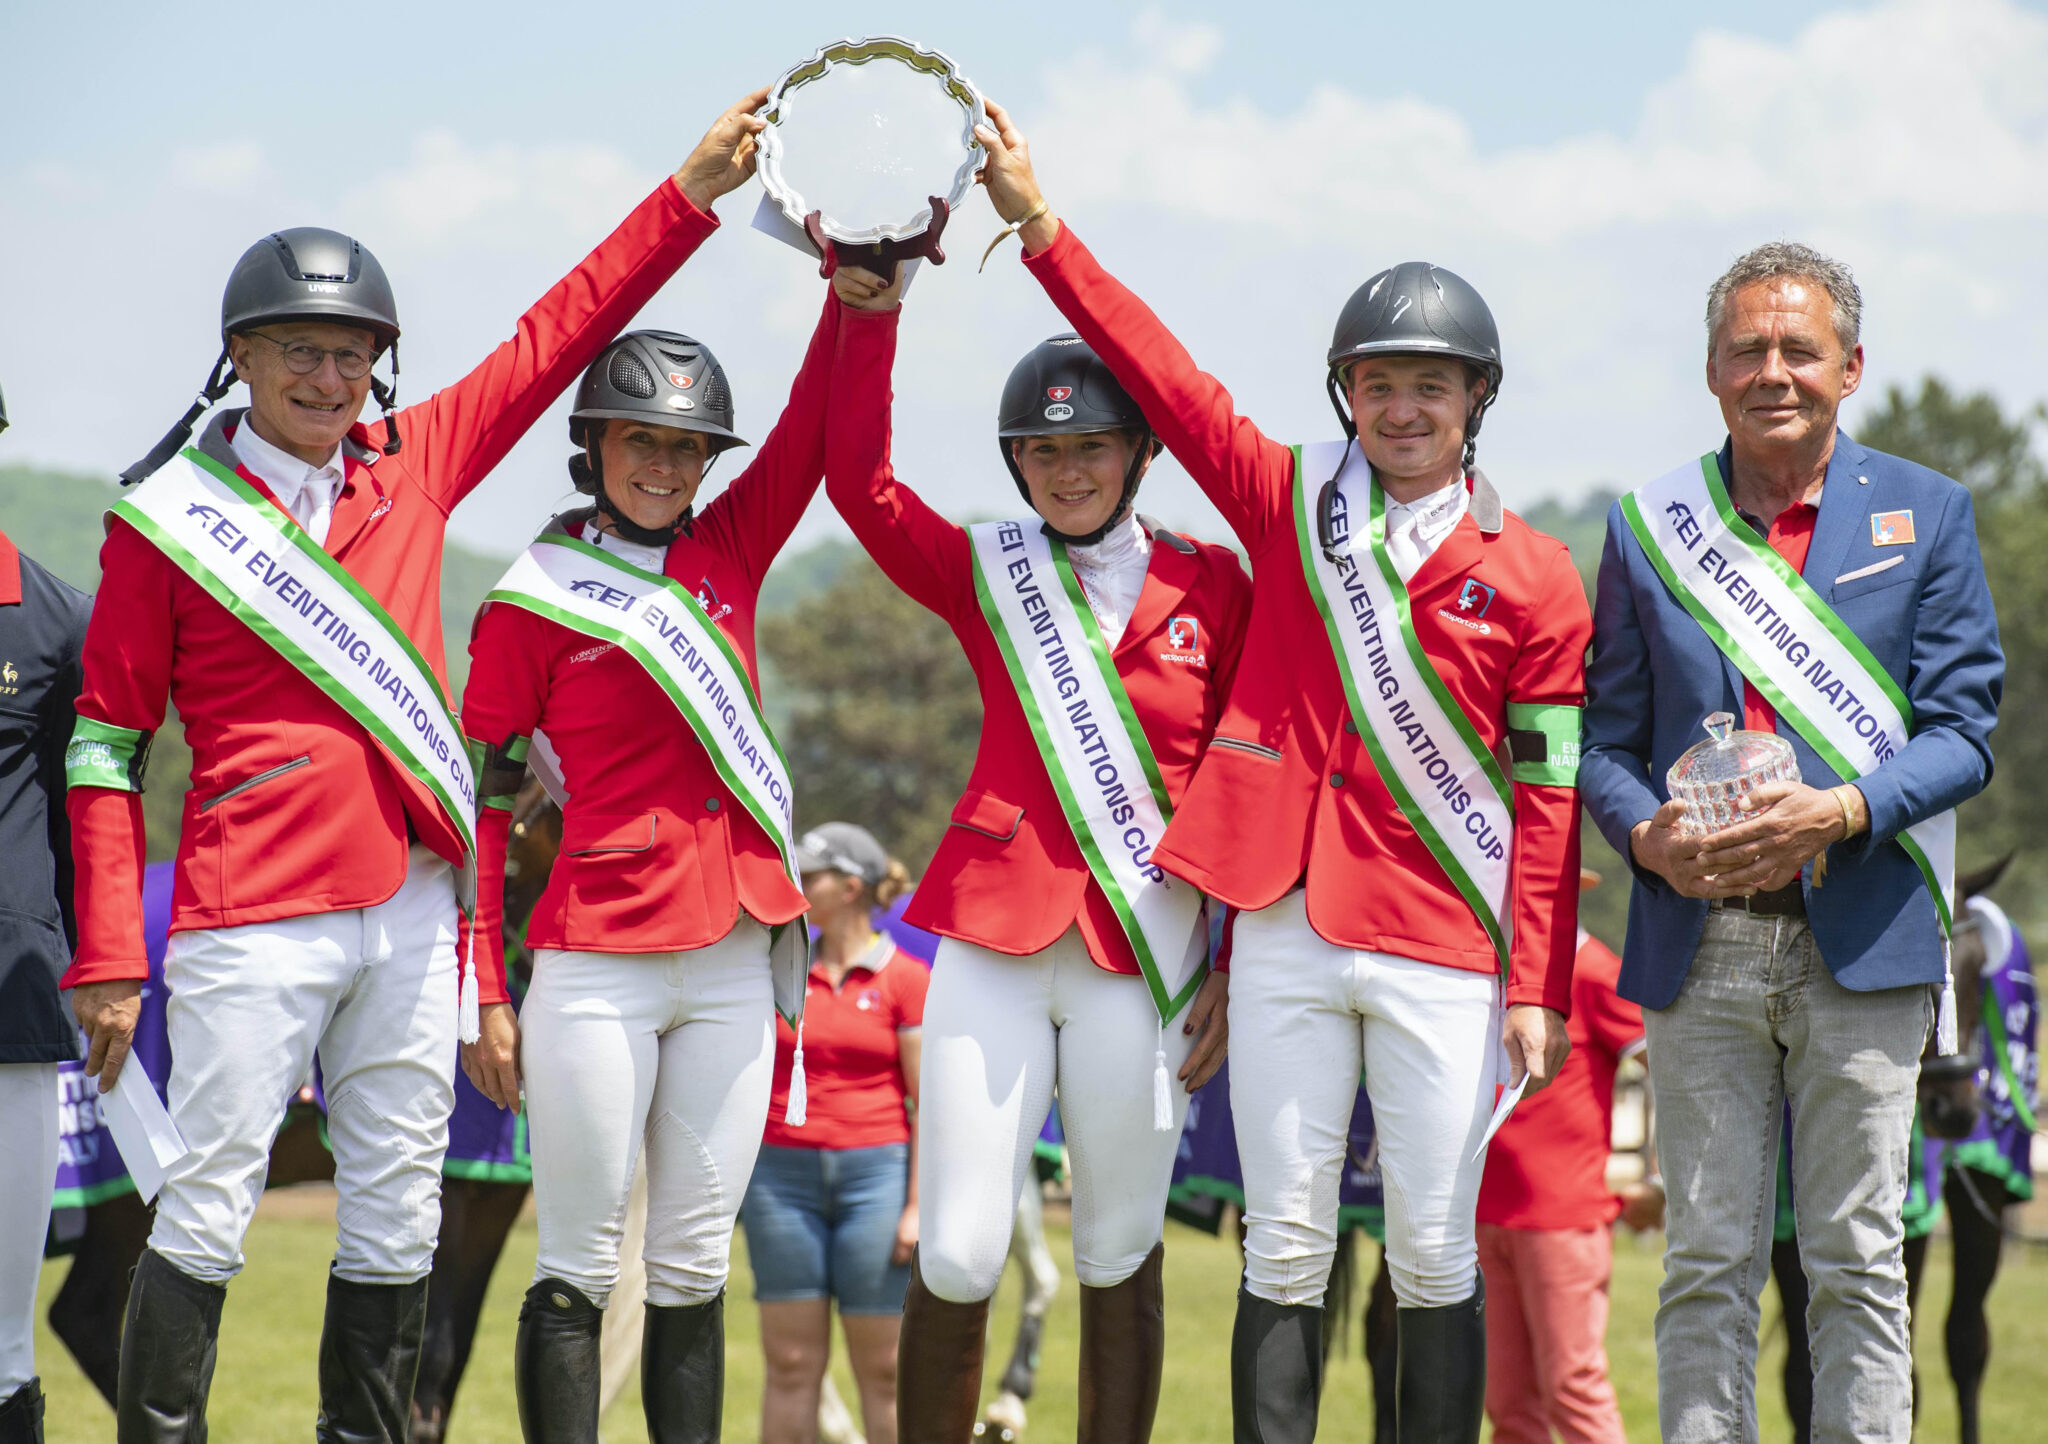 Switzerland wins team competition in World Cup test event